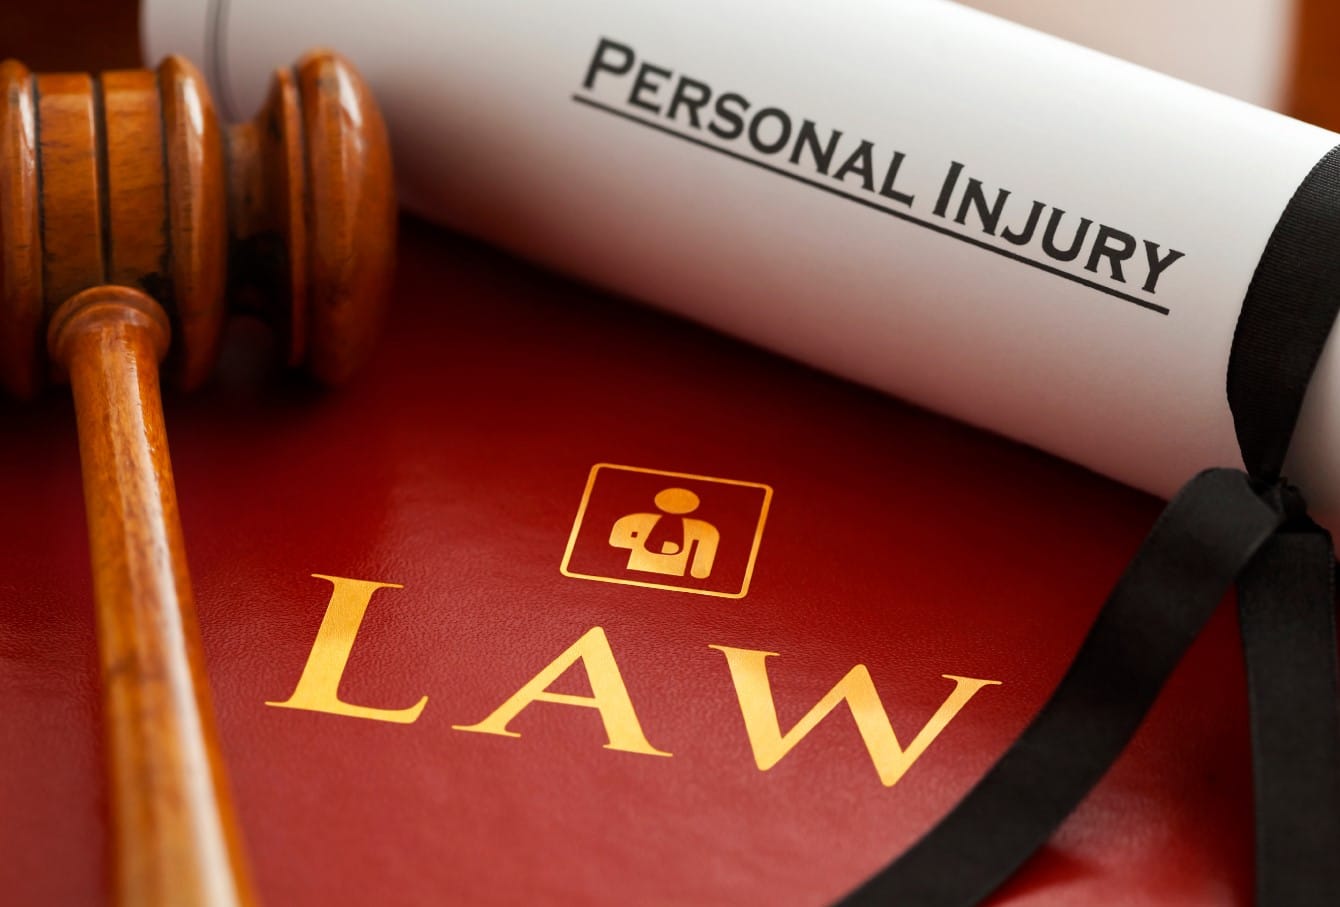 personal injury law advice